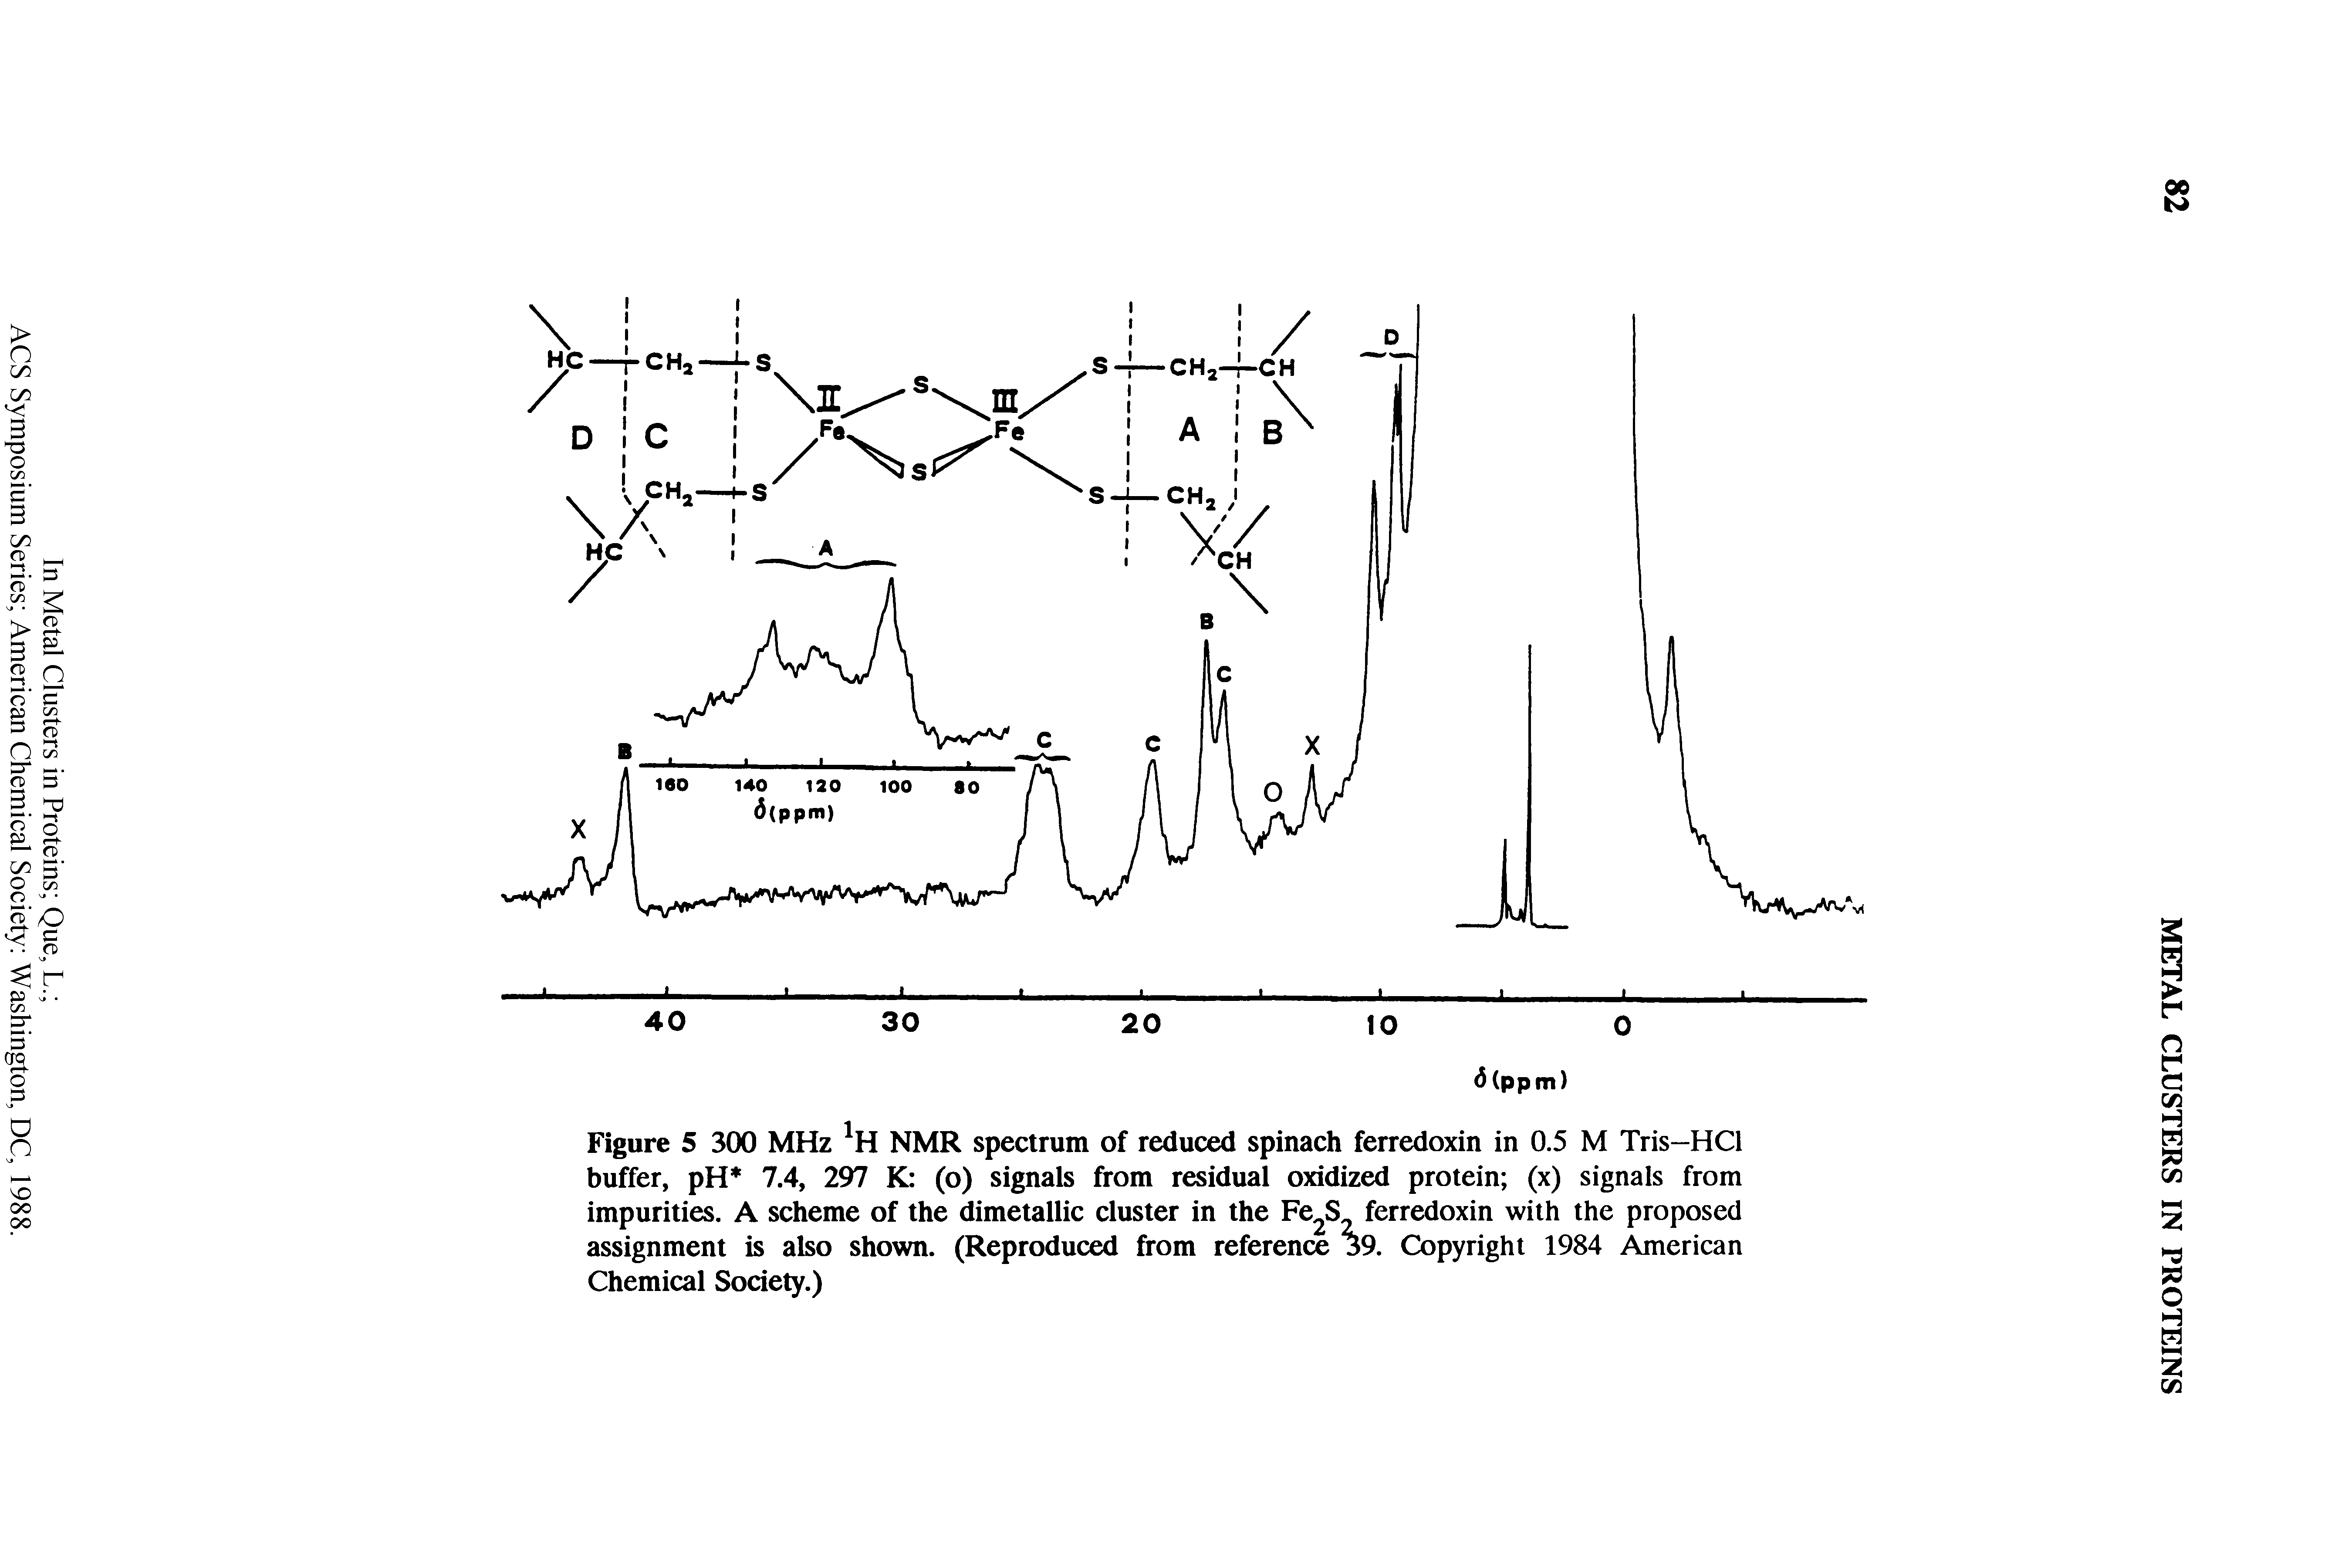 Figure 5 300 MHz NMR spectrum of reduced spinach ferredoxin in 0.5 M Tris-HCl buffer, pH 7.4, 297 K (o) signals from residual oxidized protein (x) signals from impurities. A scheme of the dimetallic cluster in the ferredoxin with the proposed...